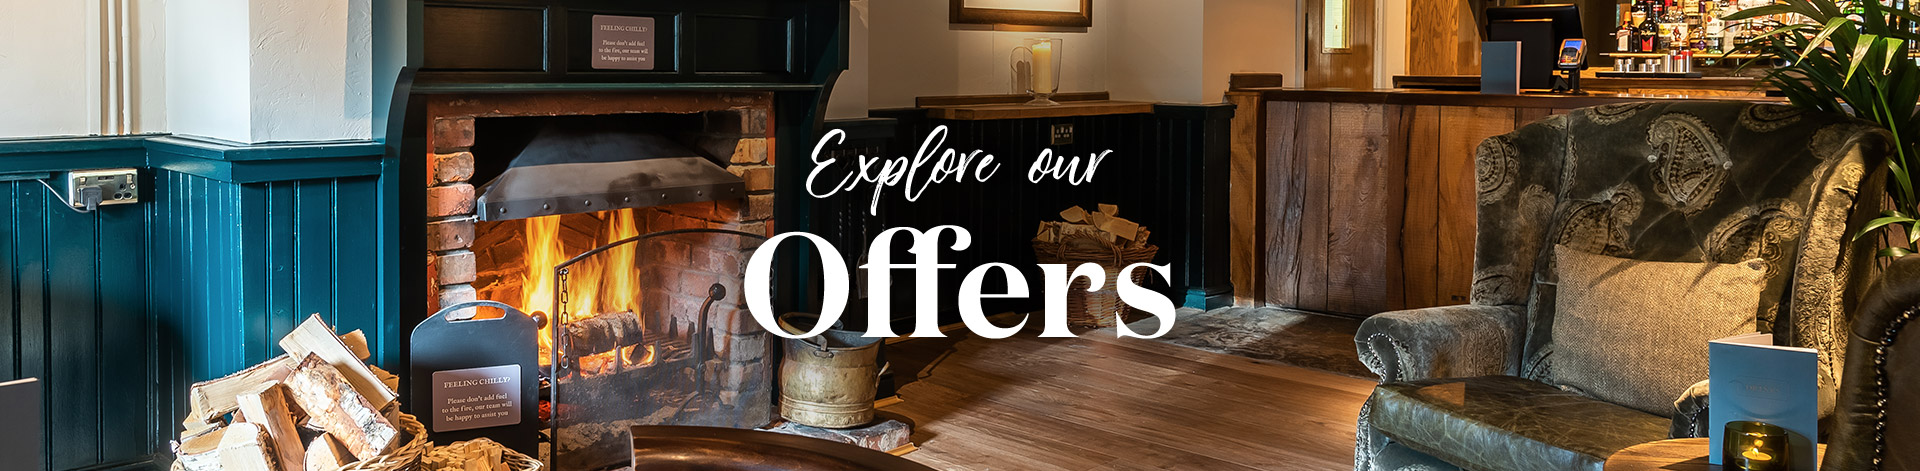 Our latest offers at The Wolseley Arms